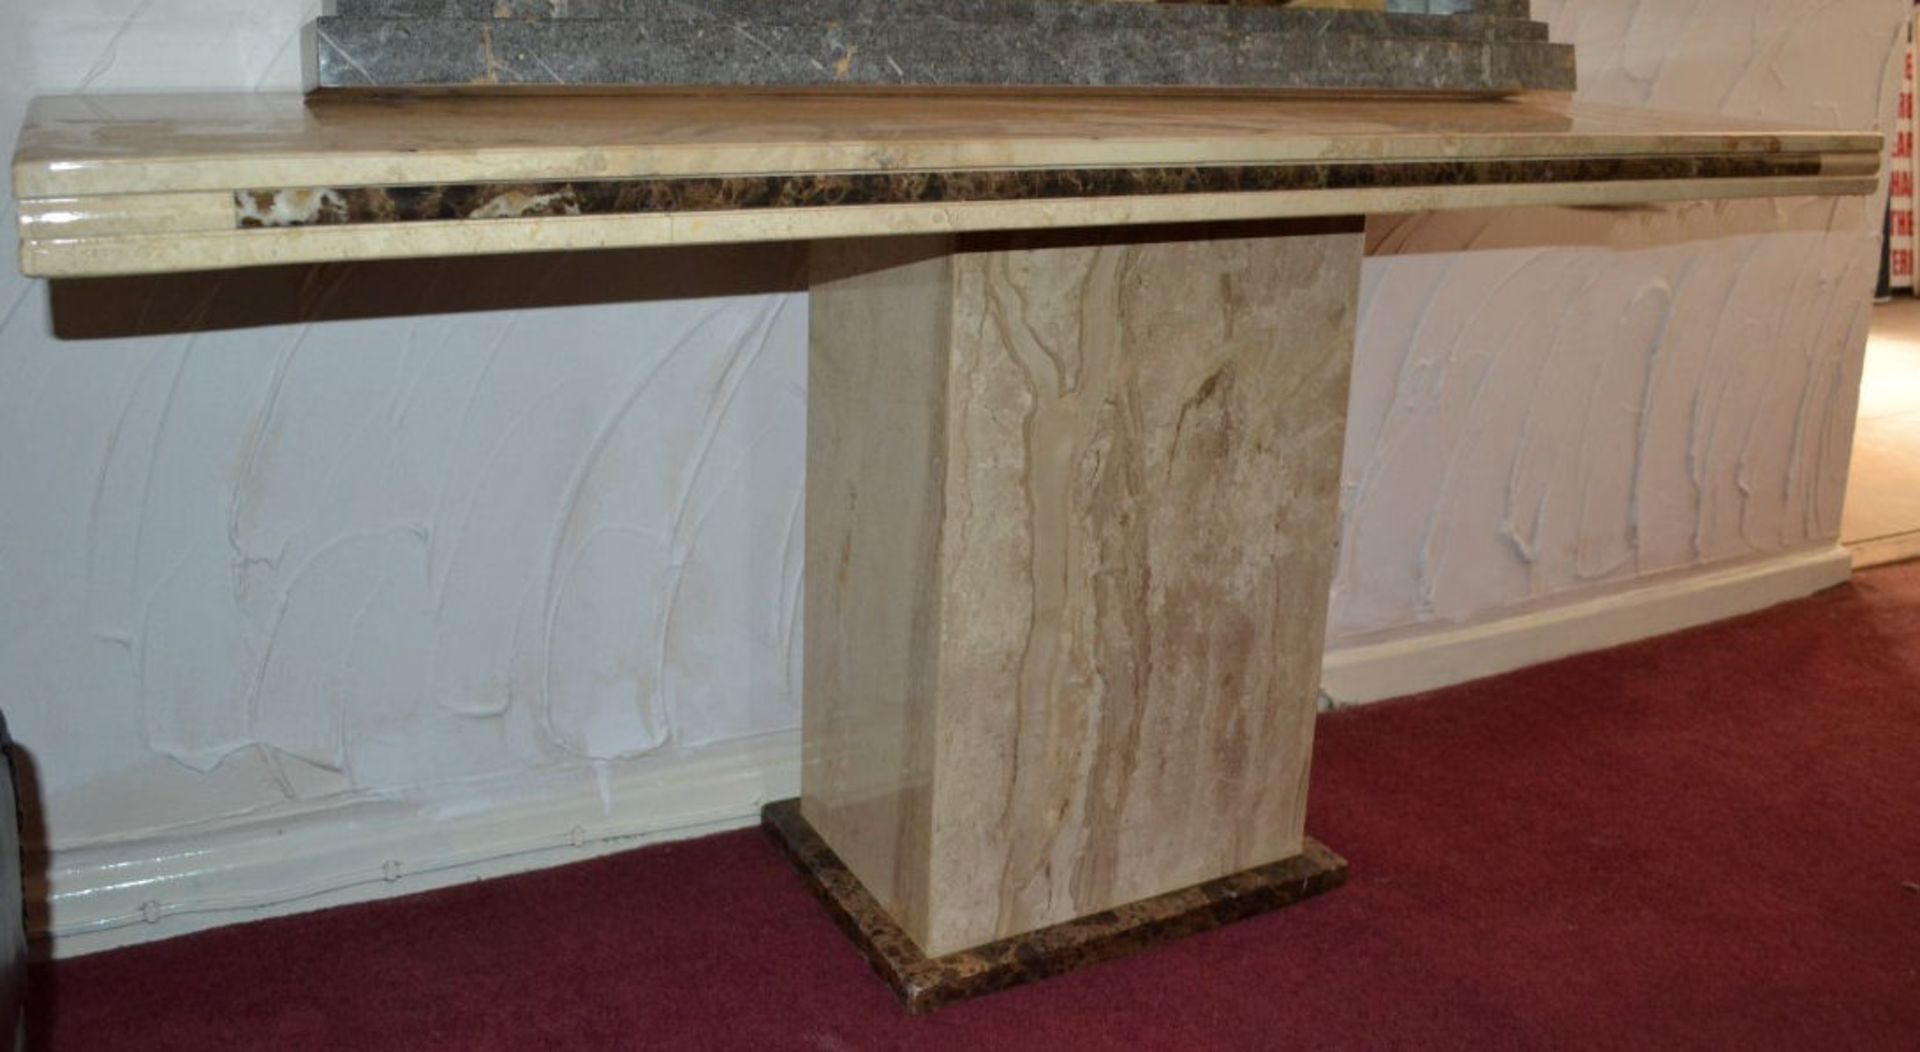 1 x Cream Marble Console Table with Chocolate Brown Edge Strip - Image 2 of 4